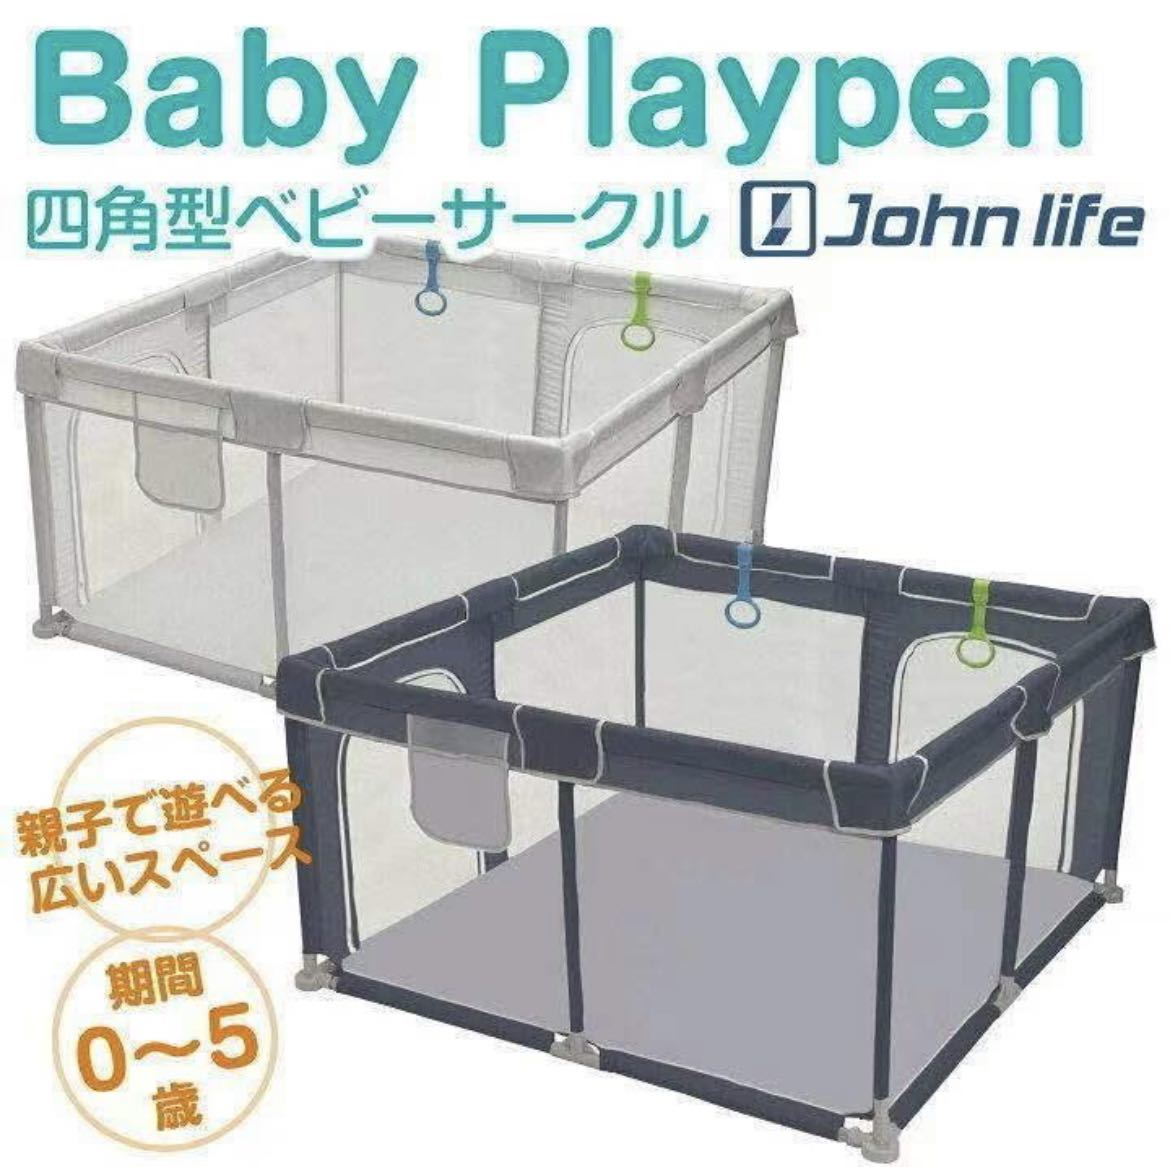  playpen mesh 120 smaller four square shape ... door attaching carrying convenience storage bag attaching baby fence object age layer 5 months ~ gray 